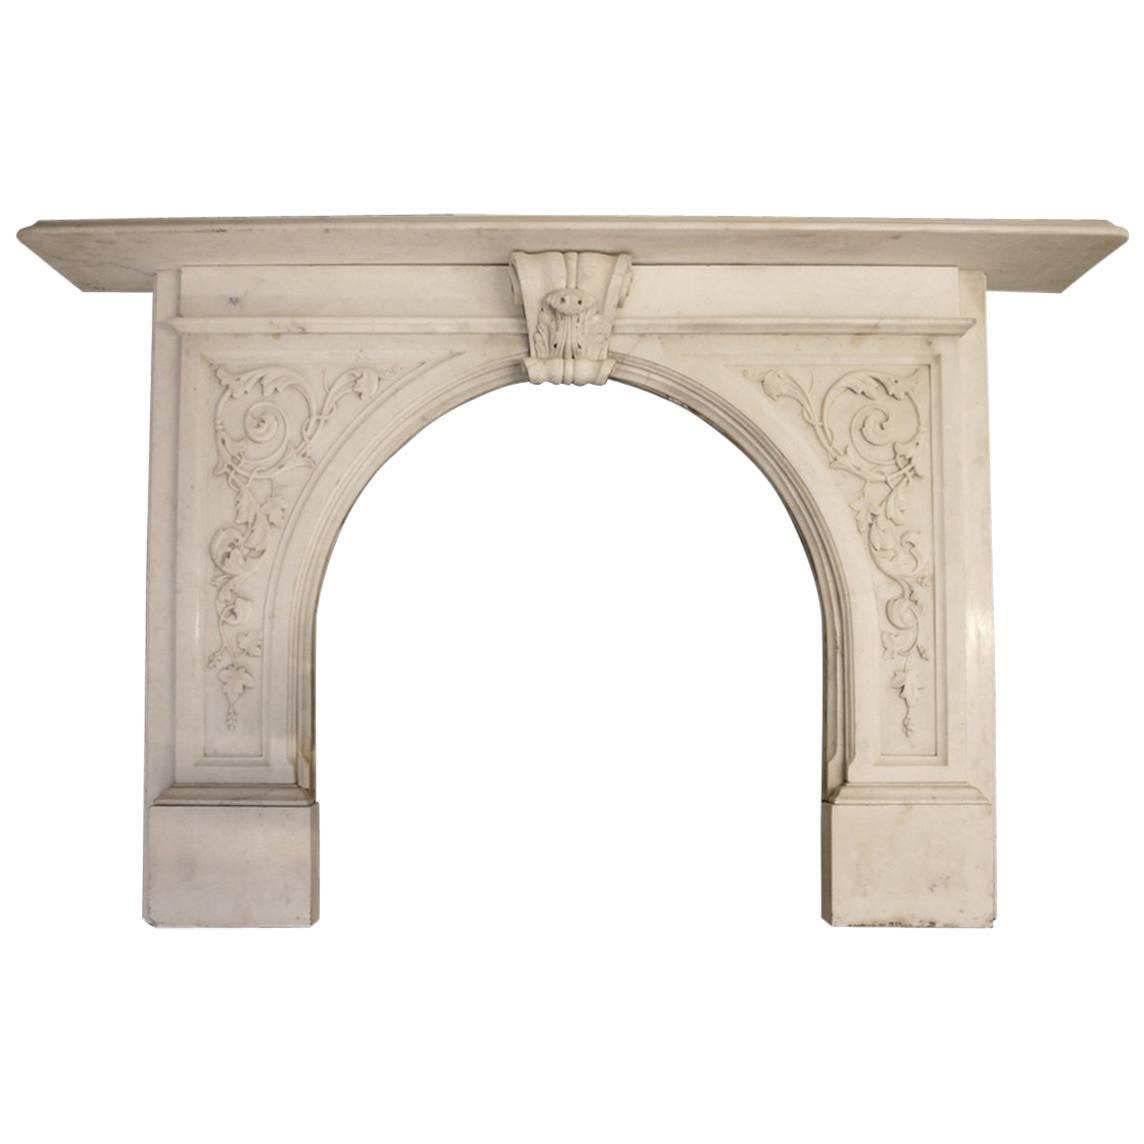 English Antique Victorian Carved Statuary Marble Fireplace Surround